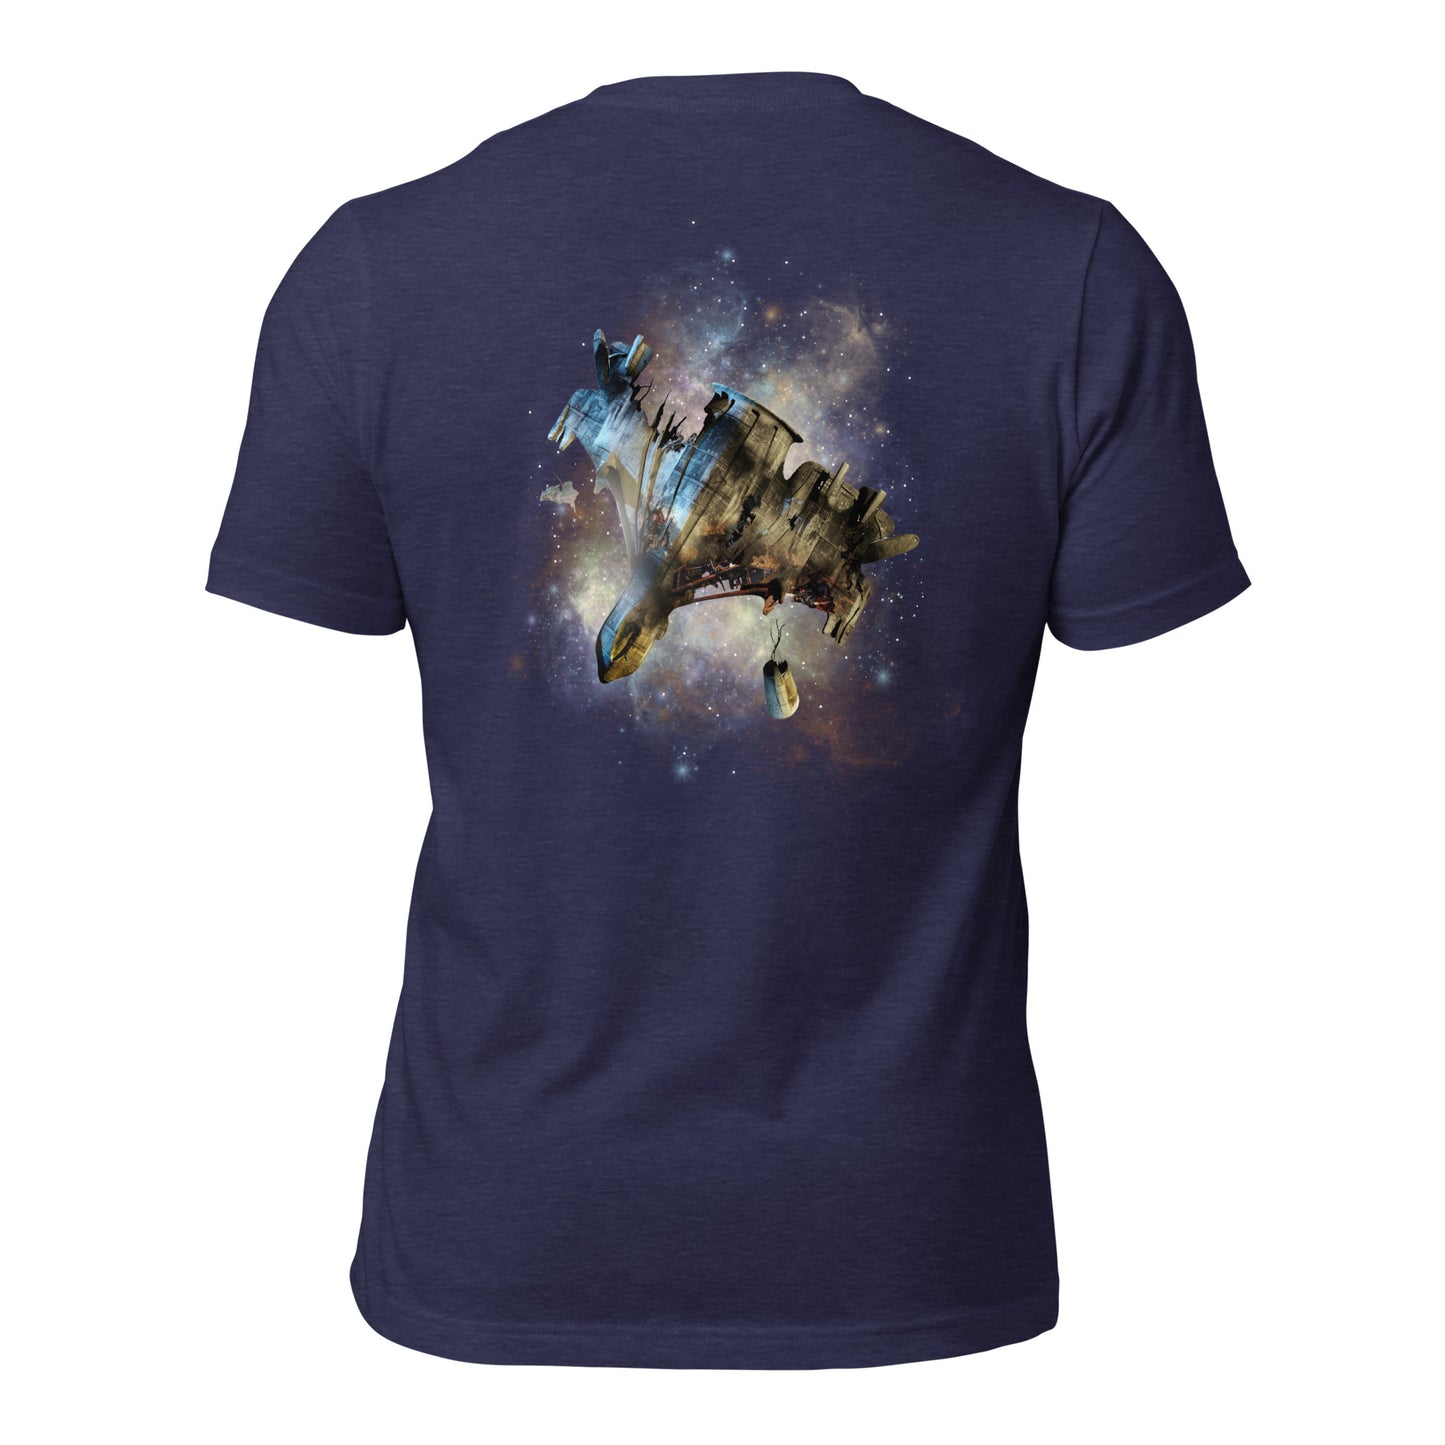 DIVING CREW & SPACESHIP WRECK T-Shirt - The Diving Universe by Kristine Kathryn Rusch